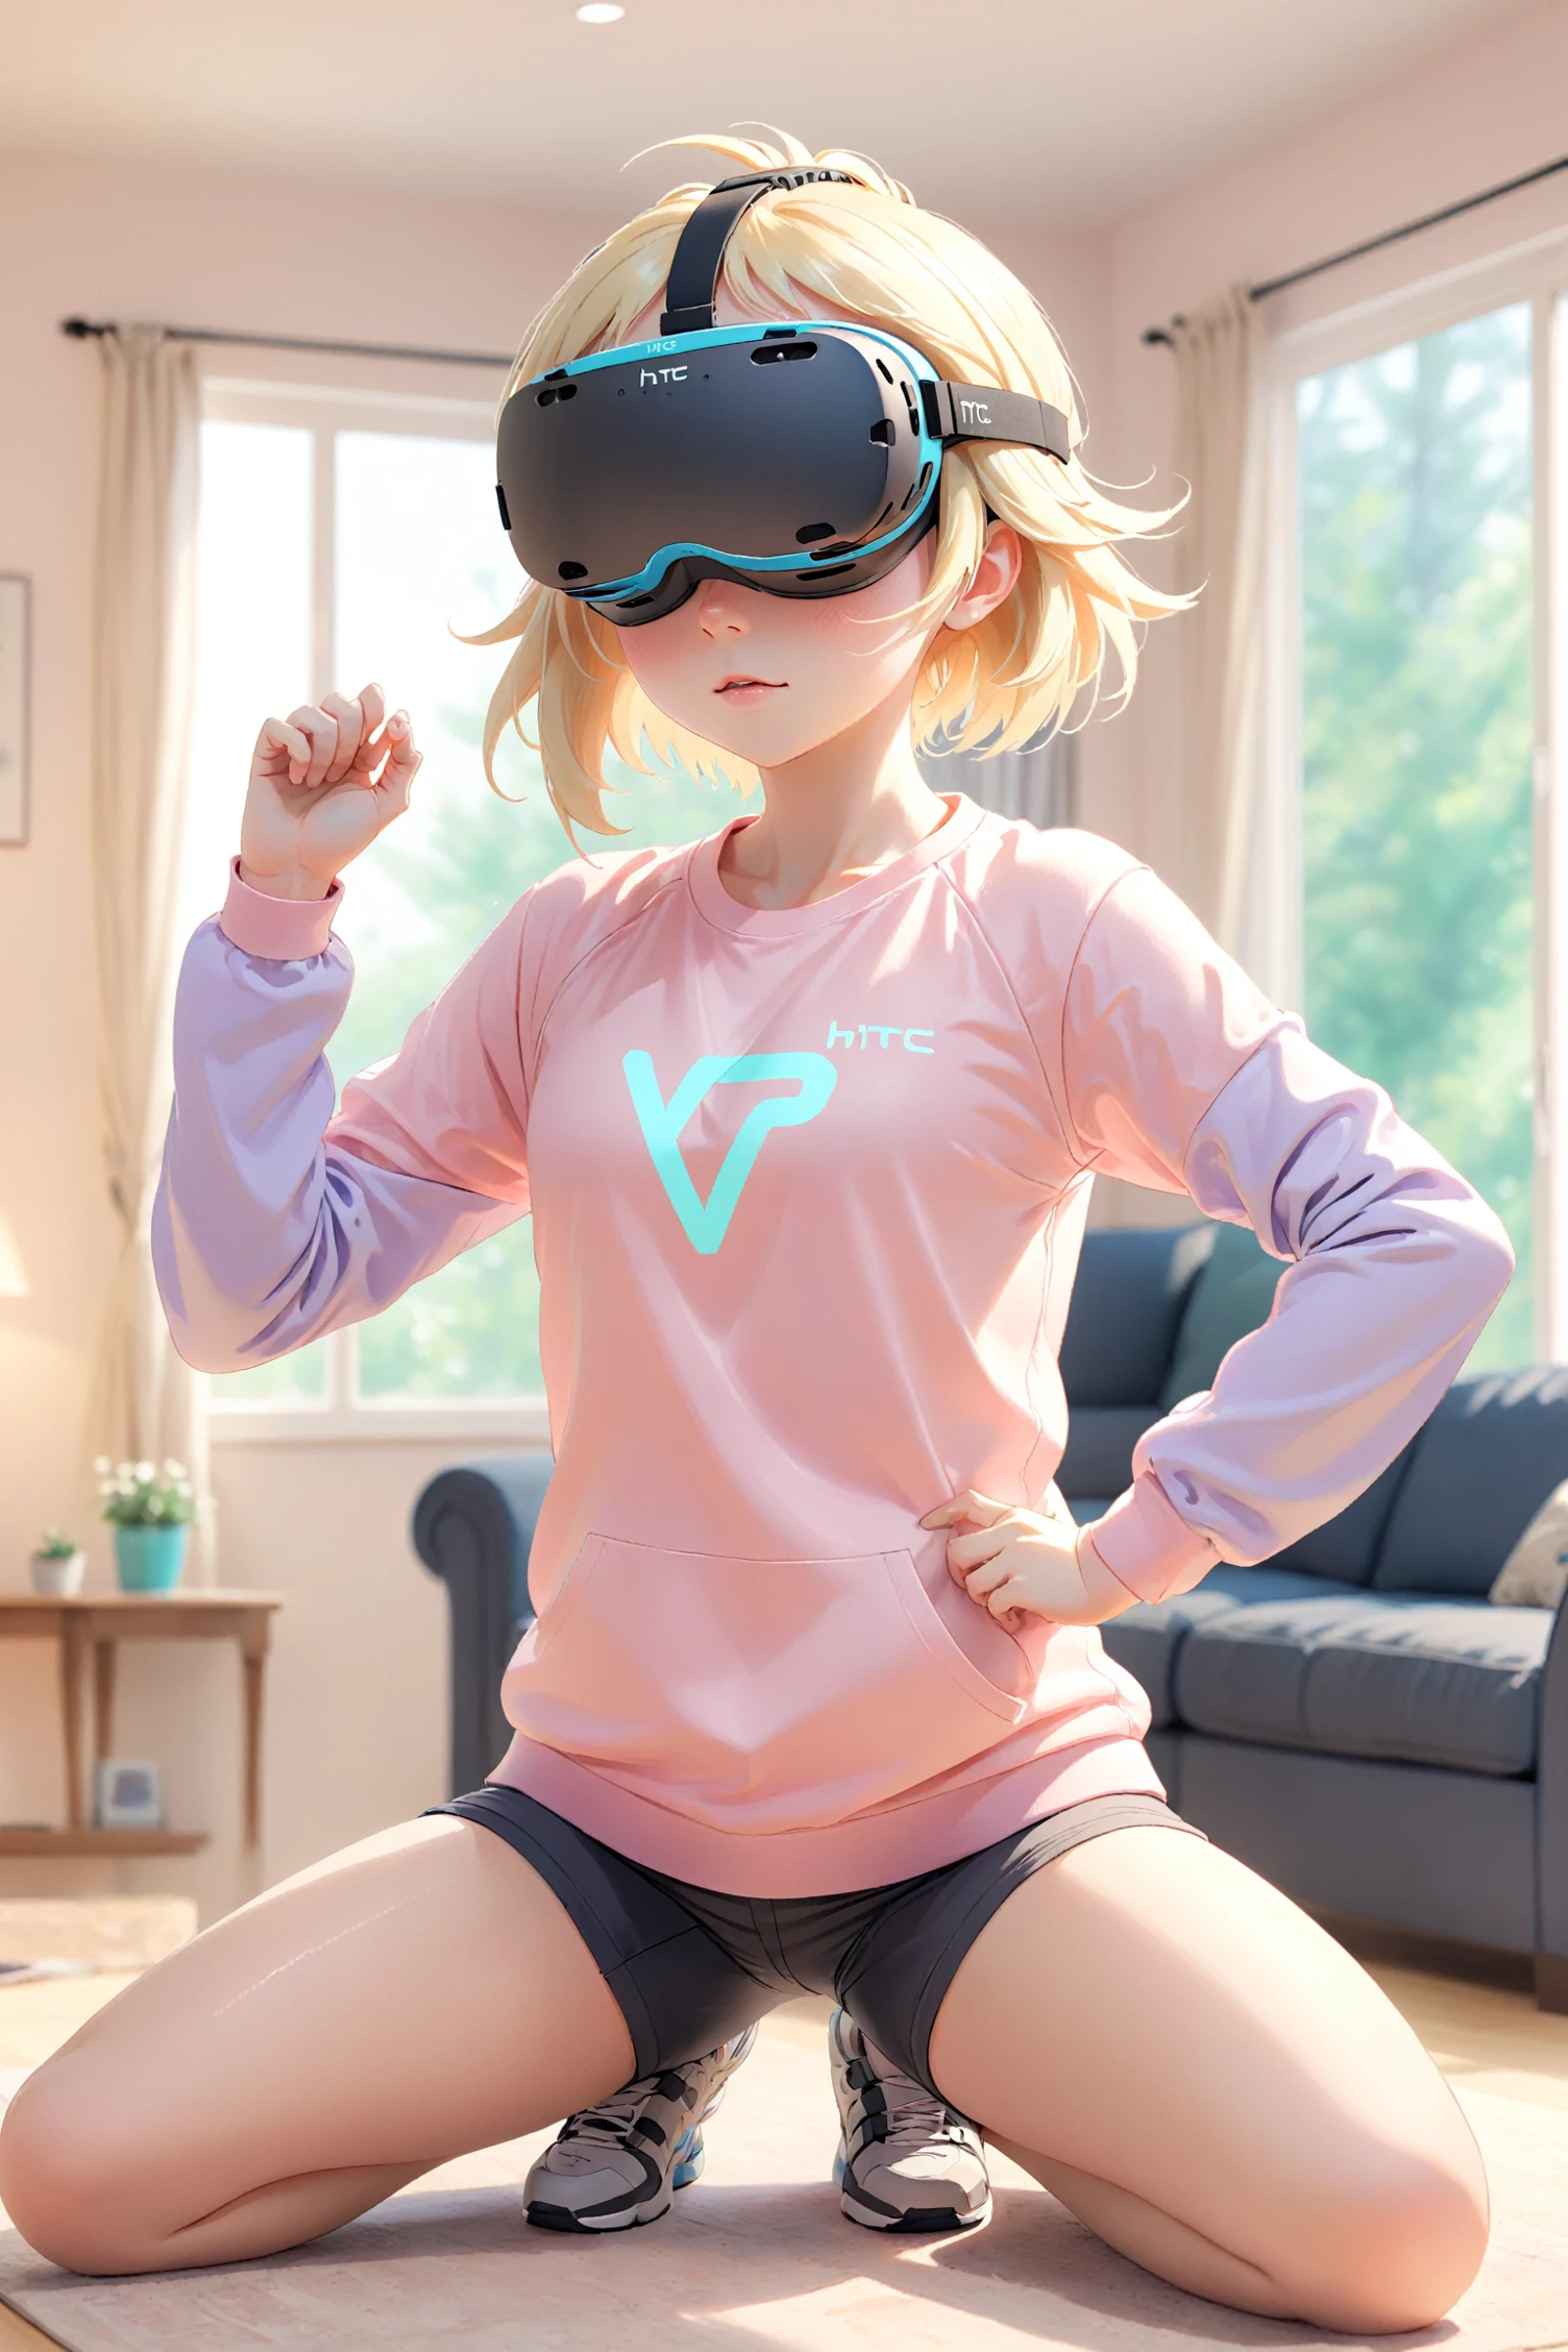 A young woman wearing a pink HTC sweatshirt and VR goggles.